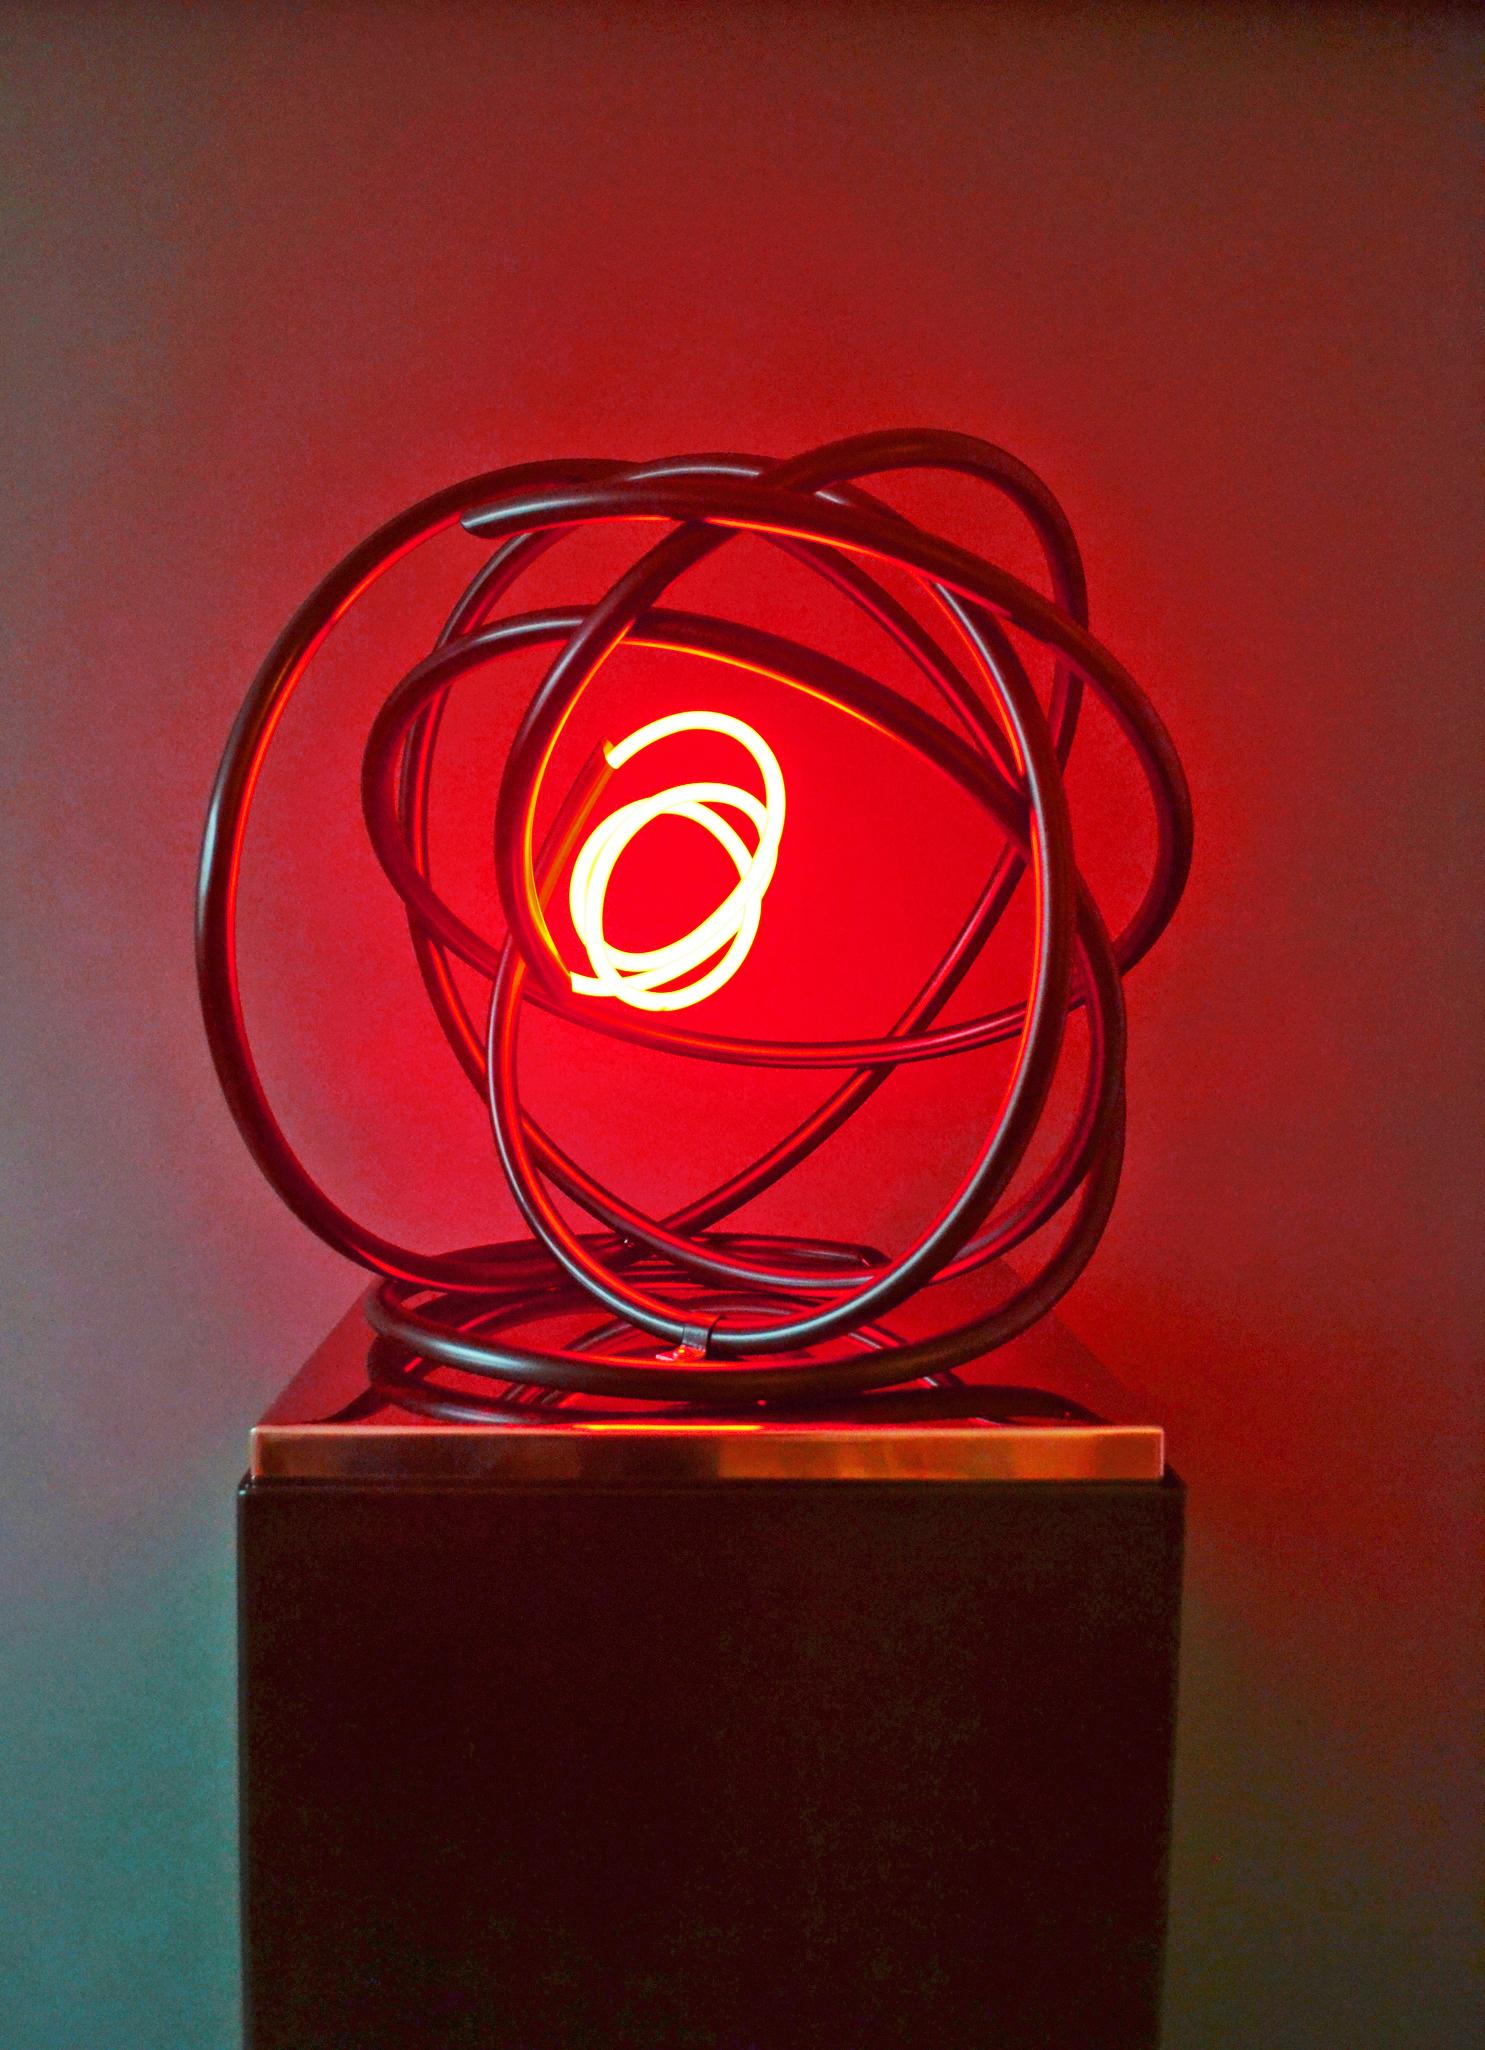 Red neon Orb sculpture copper, mirror polished stainless steel plinth - Sculpture by Mark Beattie